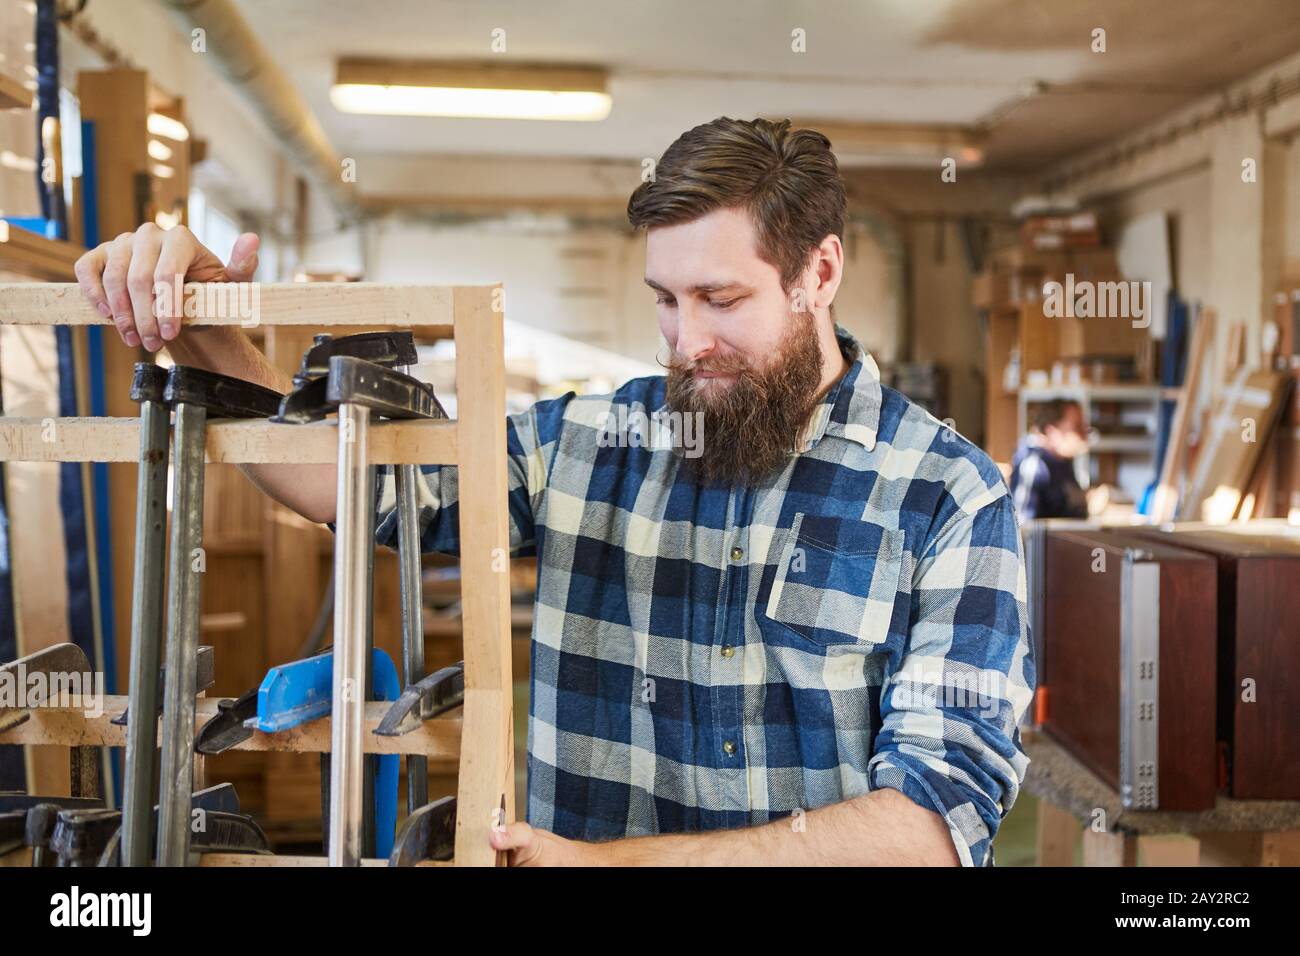 Man as a Carpenter with screw clamps in a joinery Stock Photo